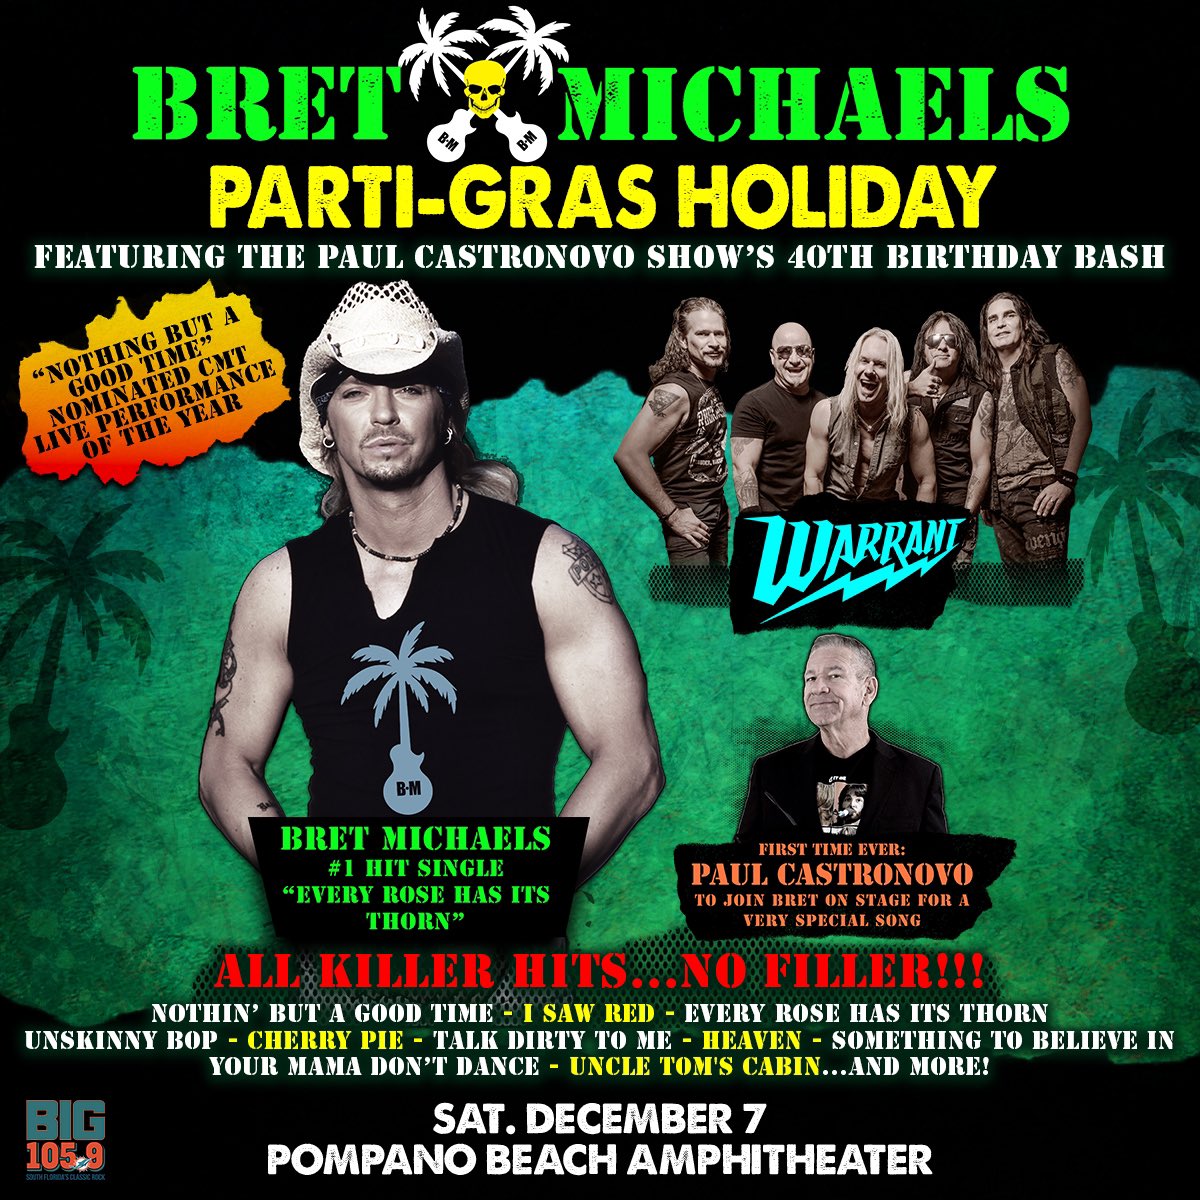 Special announcement! Bret Michaels with special guests Warrant - Sat Dec 7th Pompano Beach, Florida #PartiGras Holiday Show! Pre-sale: Tuesday, April 9th - at 10am - Thursday, April 11th at 10pm Password: AEG - Public On Sale: Friday, April 12th at 10am